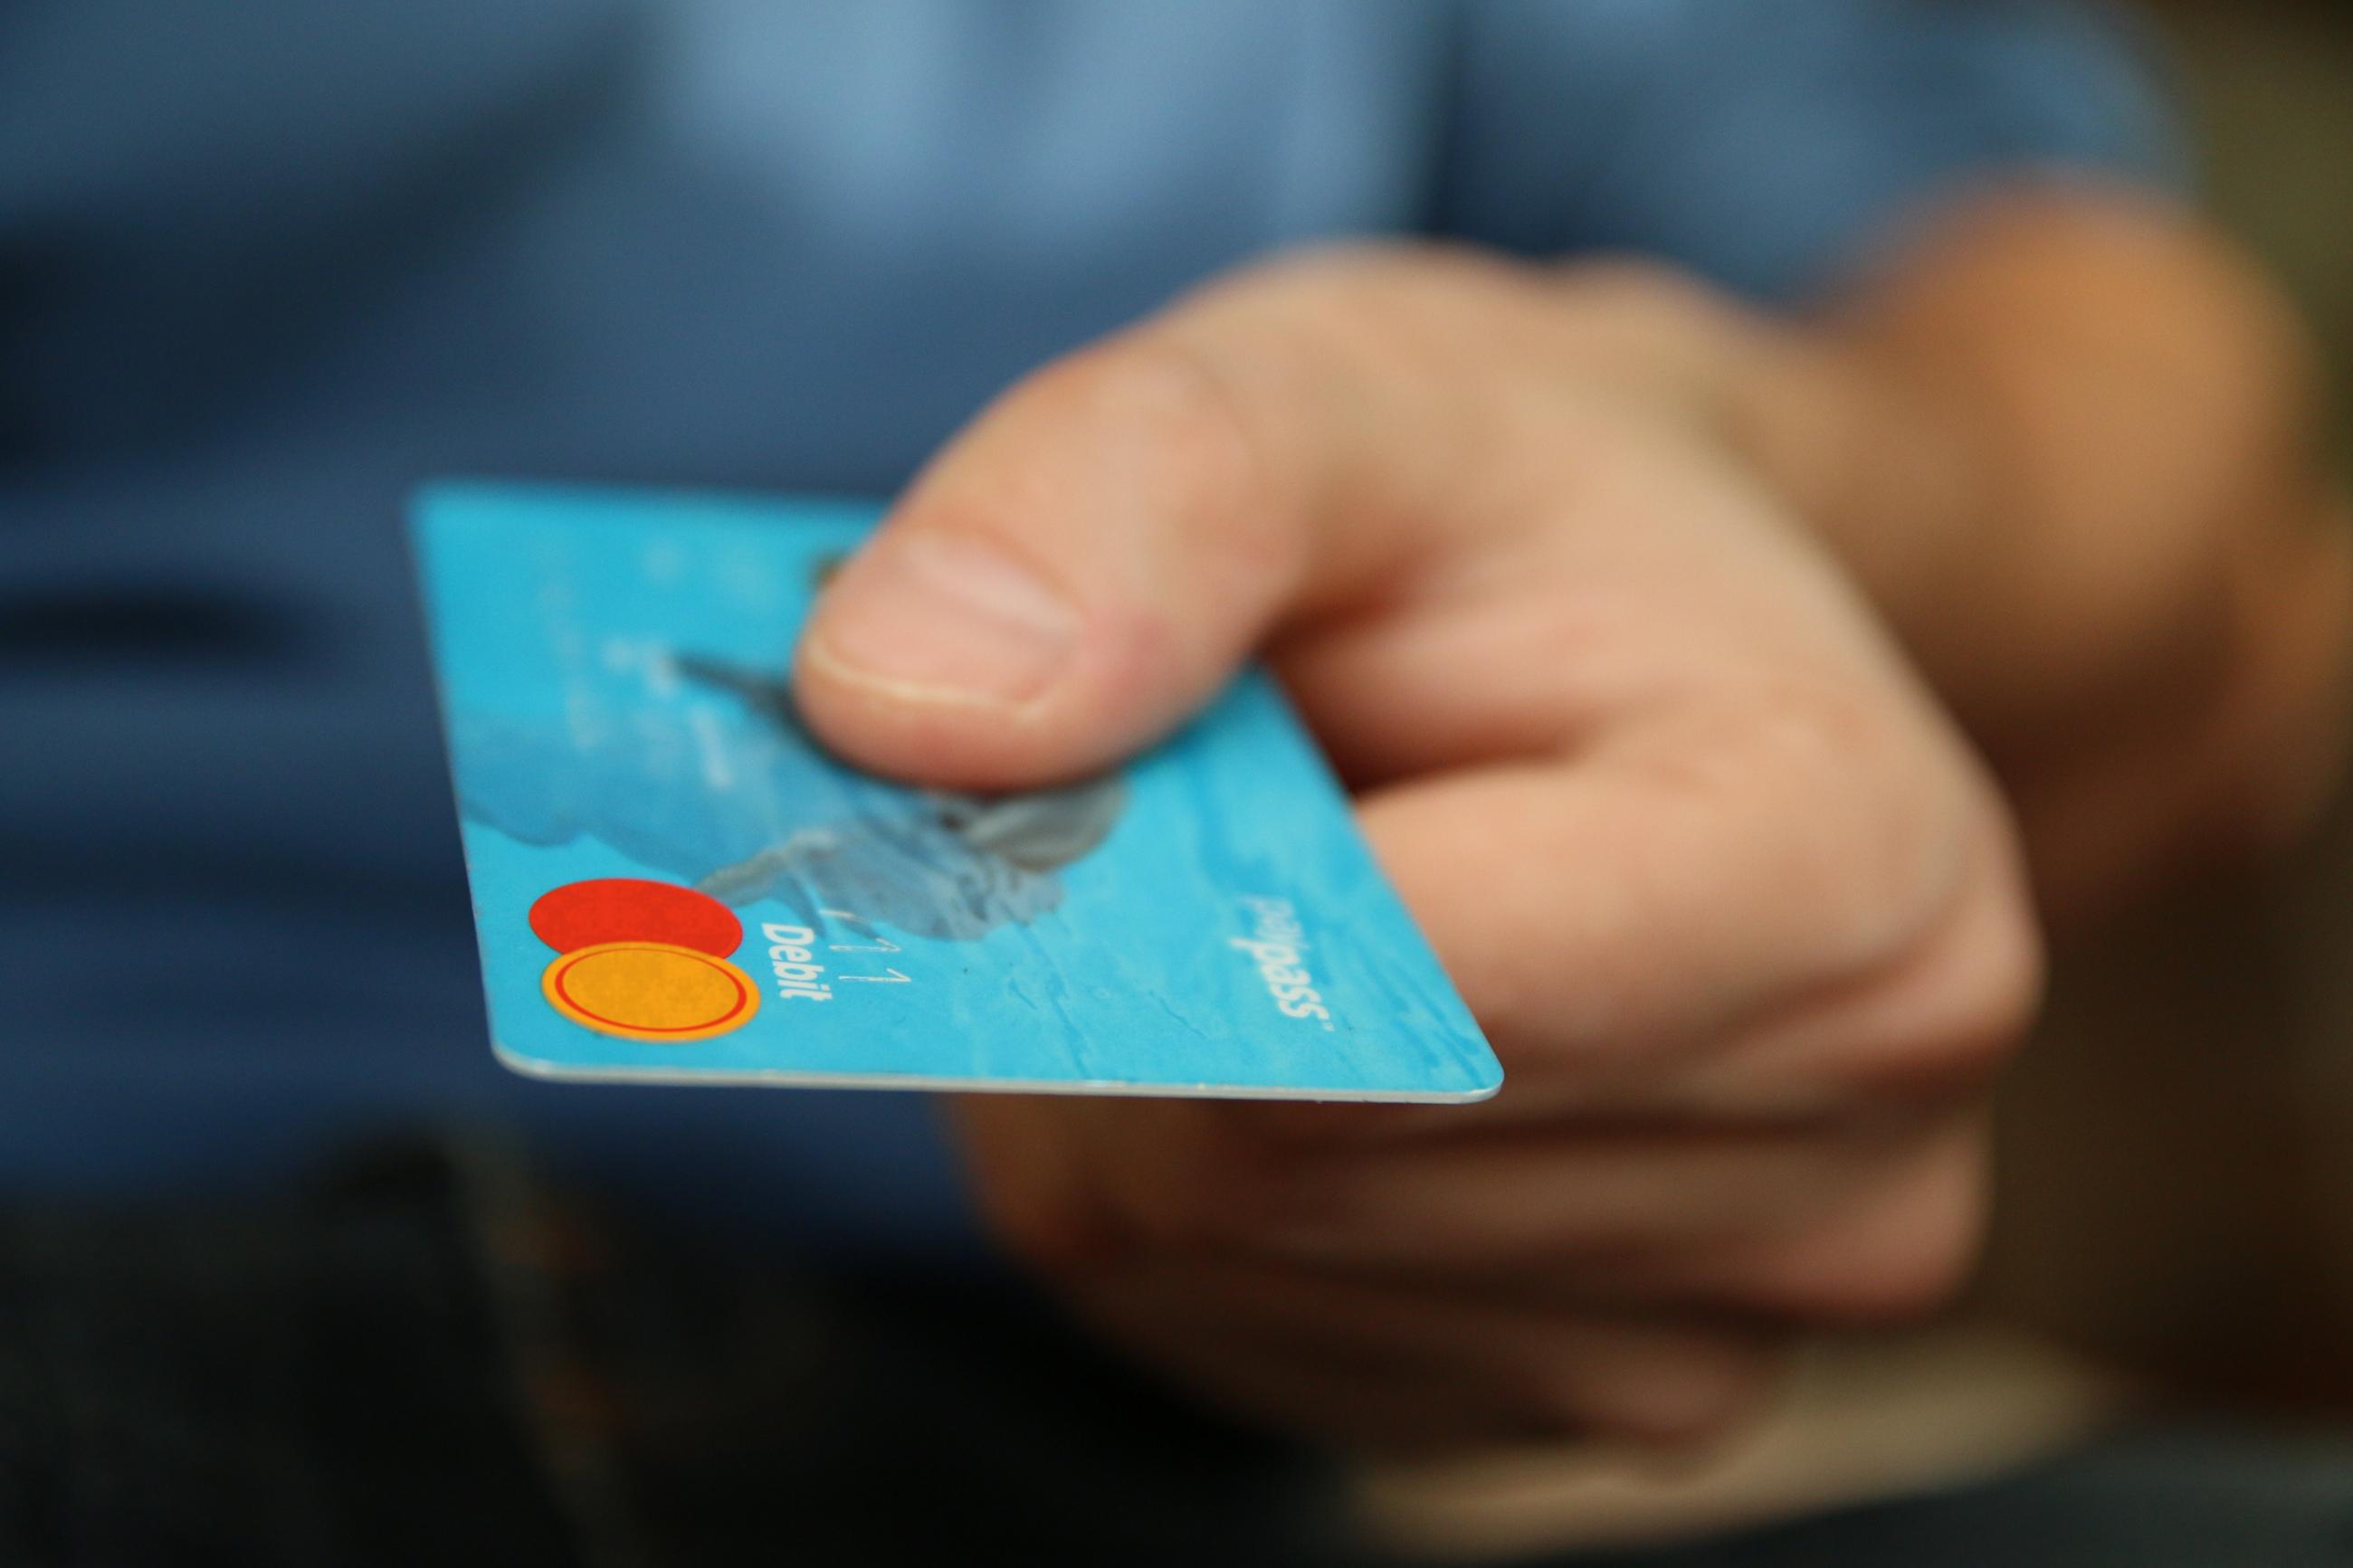 YHN are warning of credit card scams